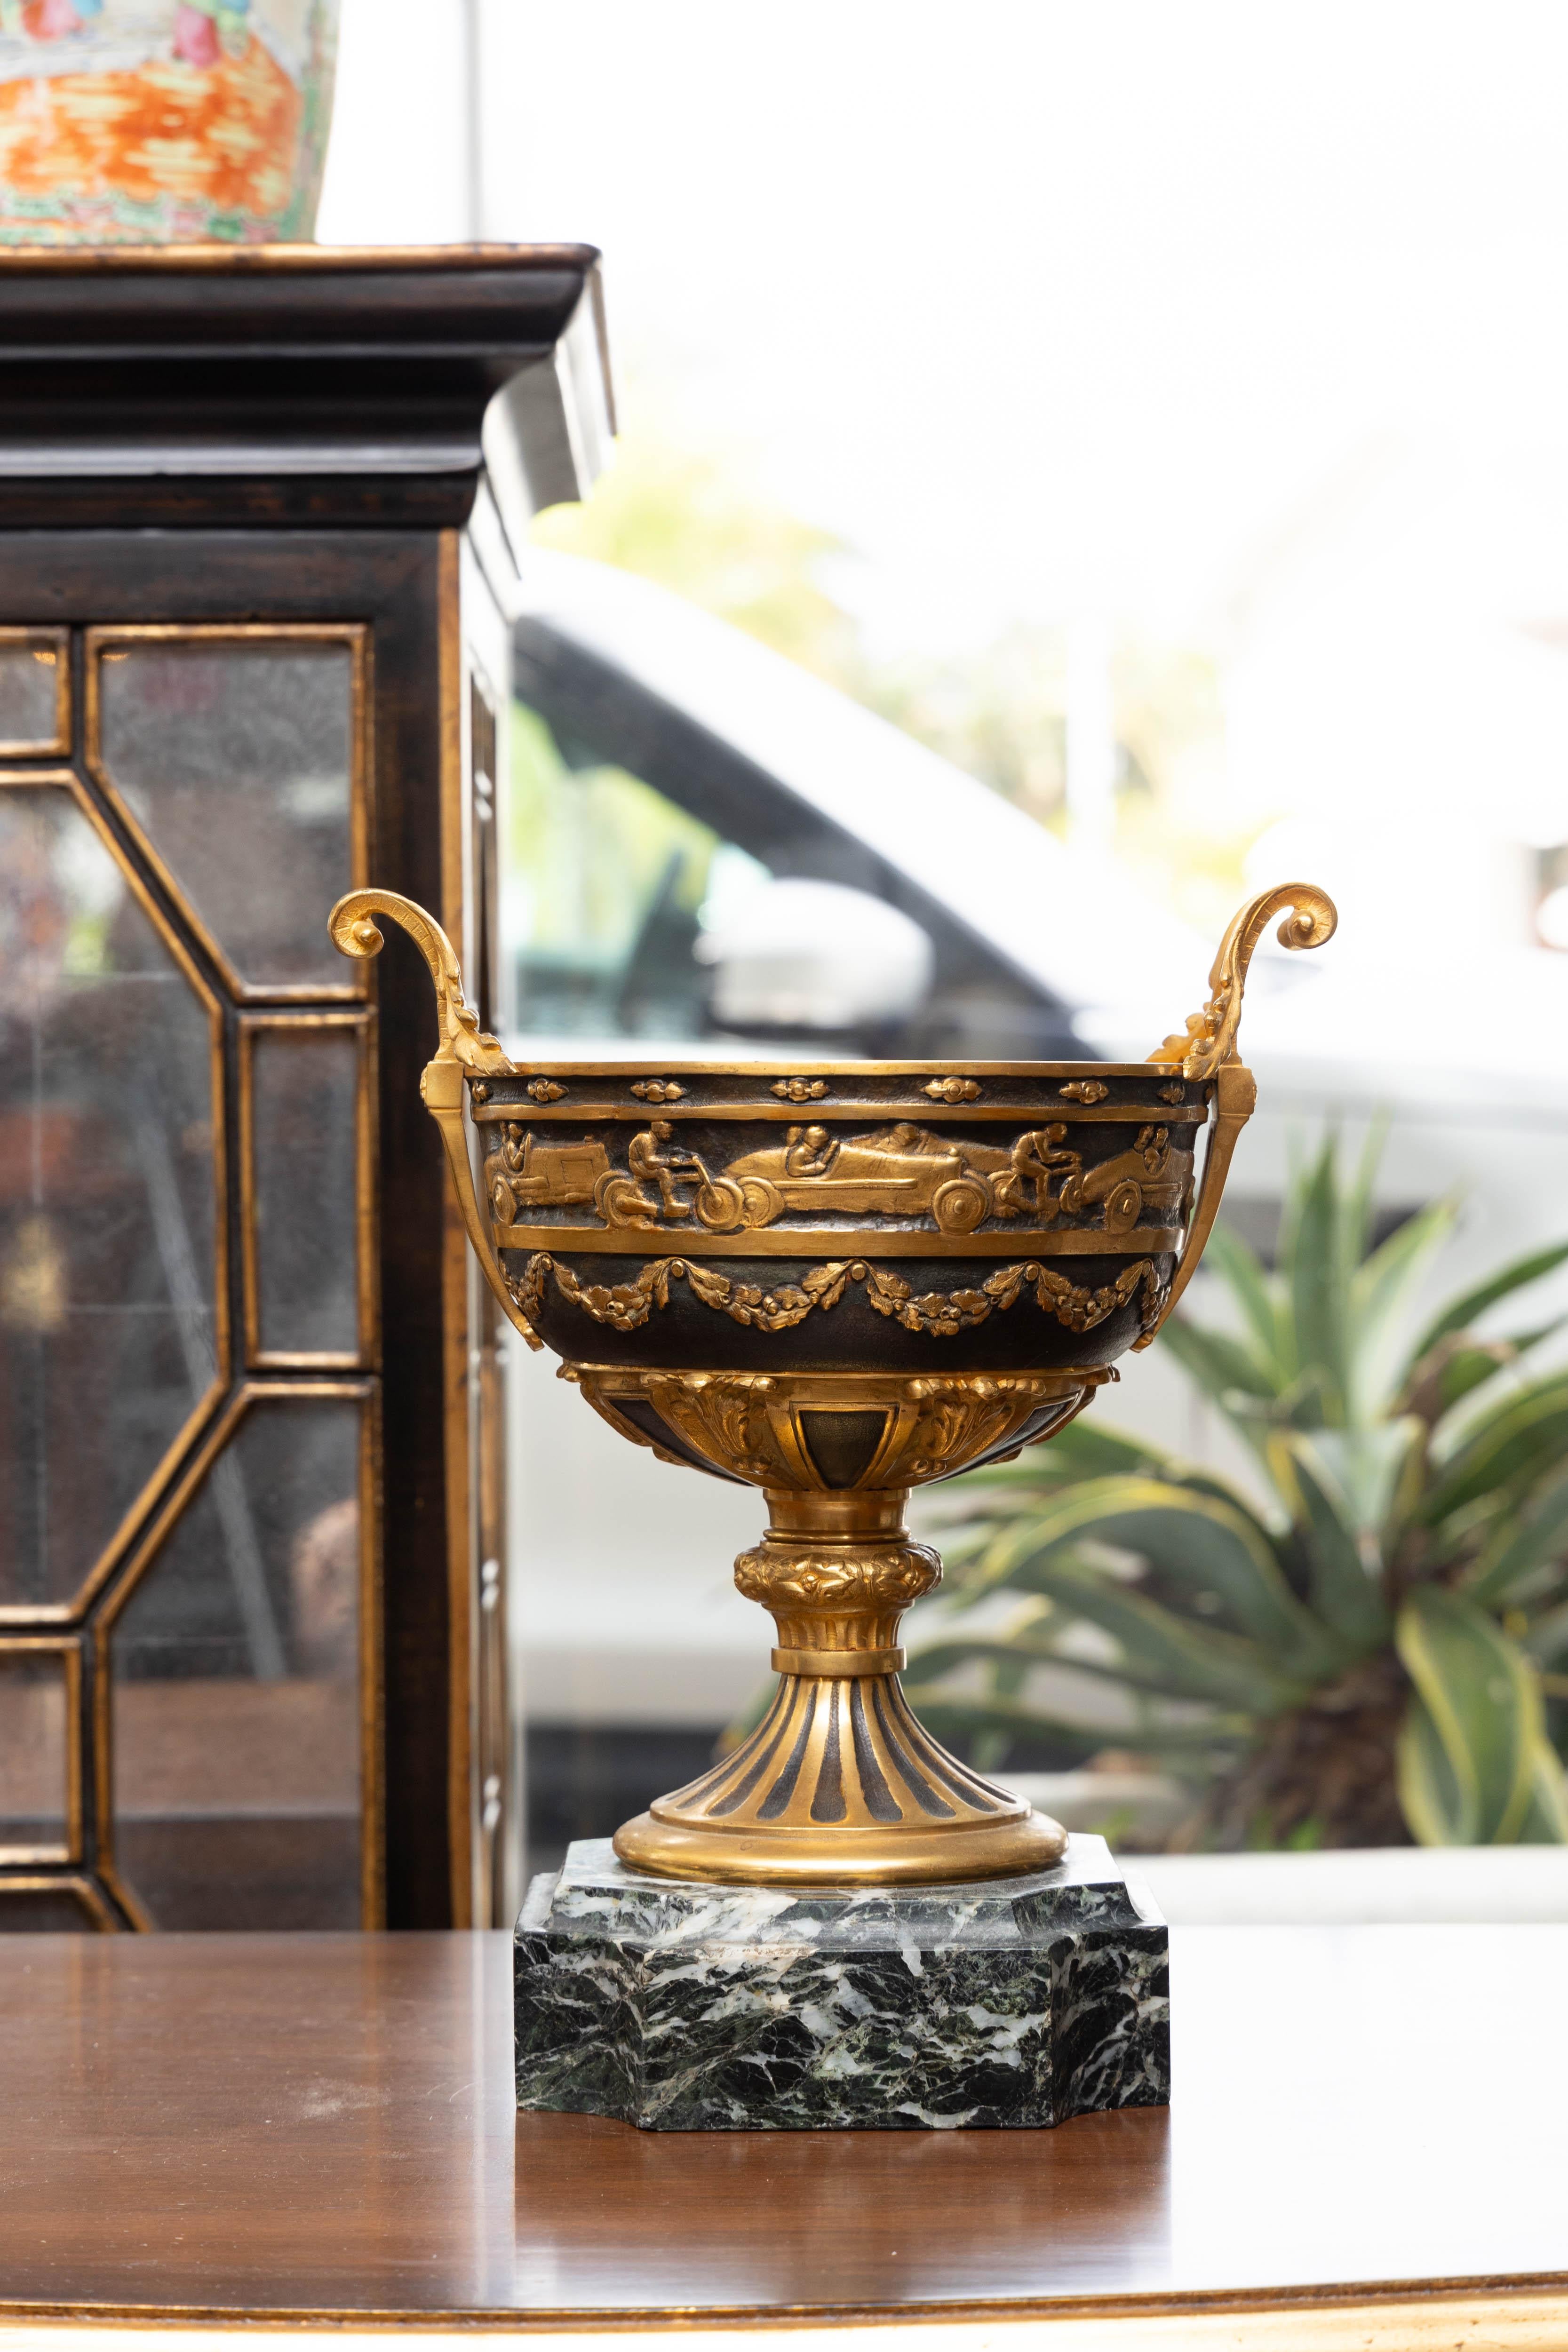 This is a stately looking patinated and gilt bronze chalice-style urn situated on a Verdi marble base.  This is possibly a trophy cup, featuring depictions of a variety of early race cars and motor cycles around the upper circumference and